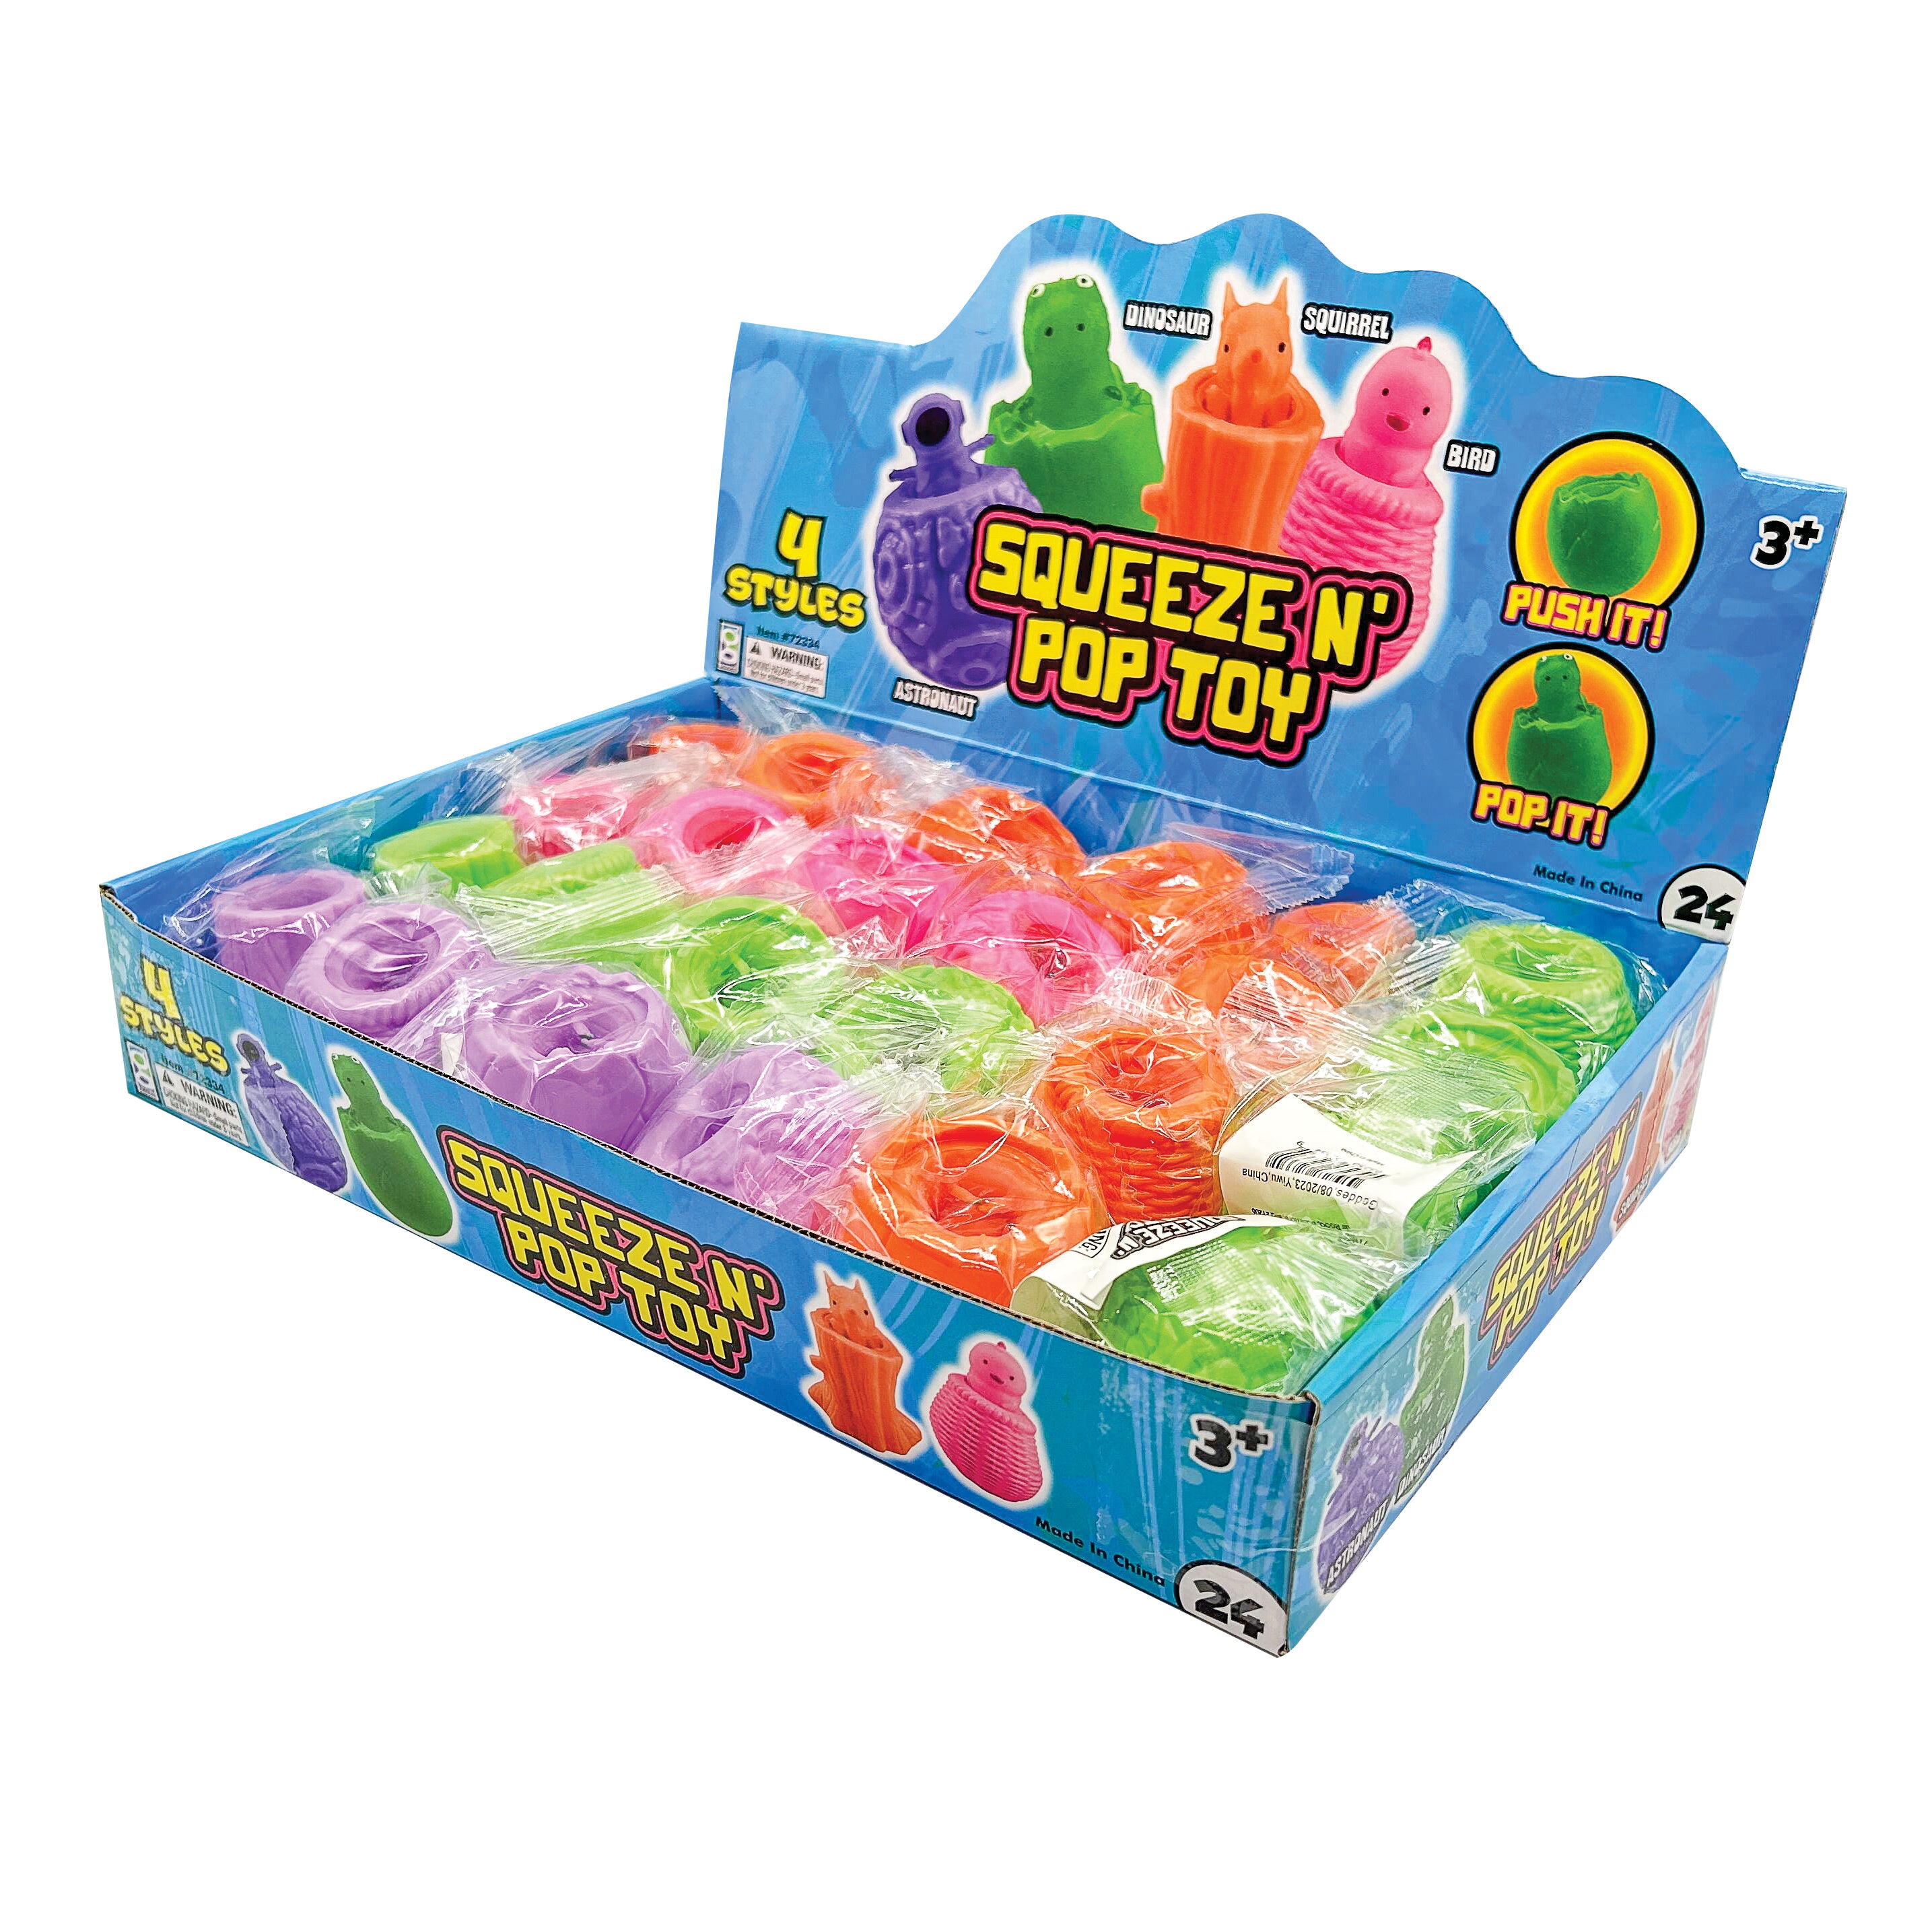 Squeeze ‘N’ Pop Toys